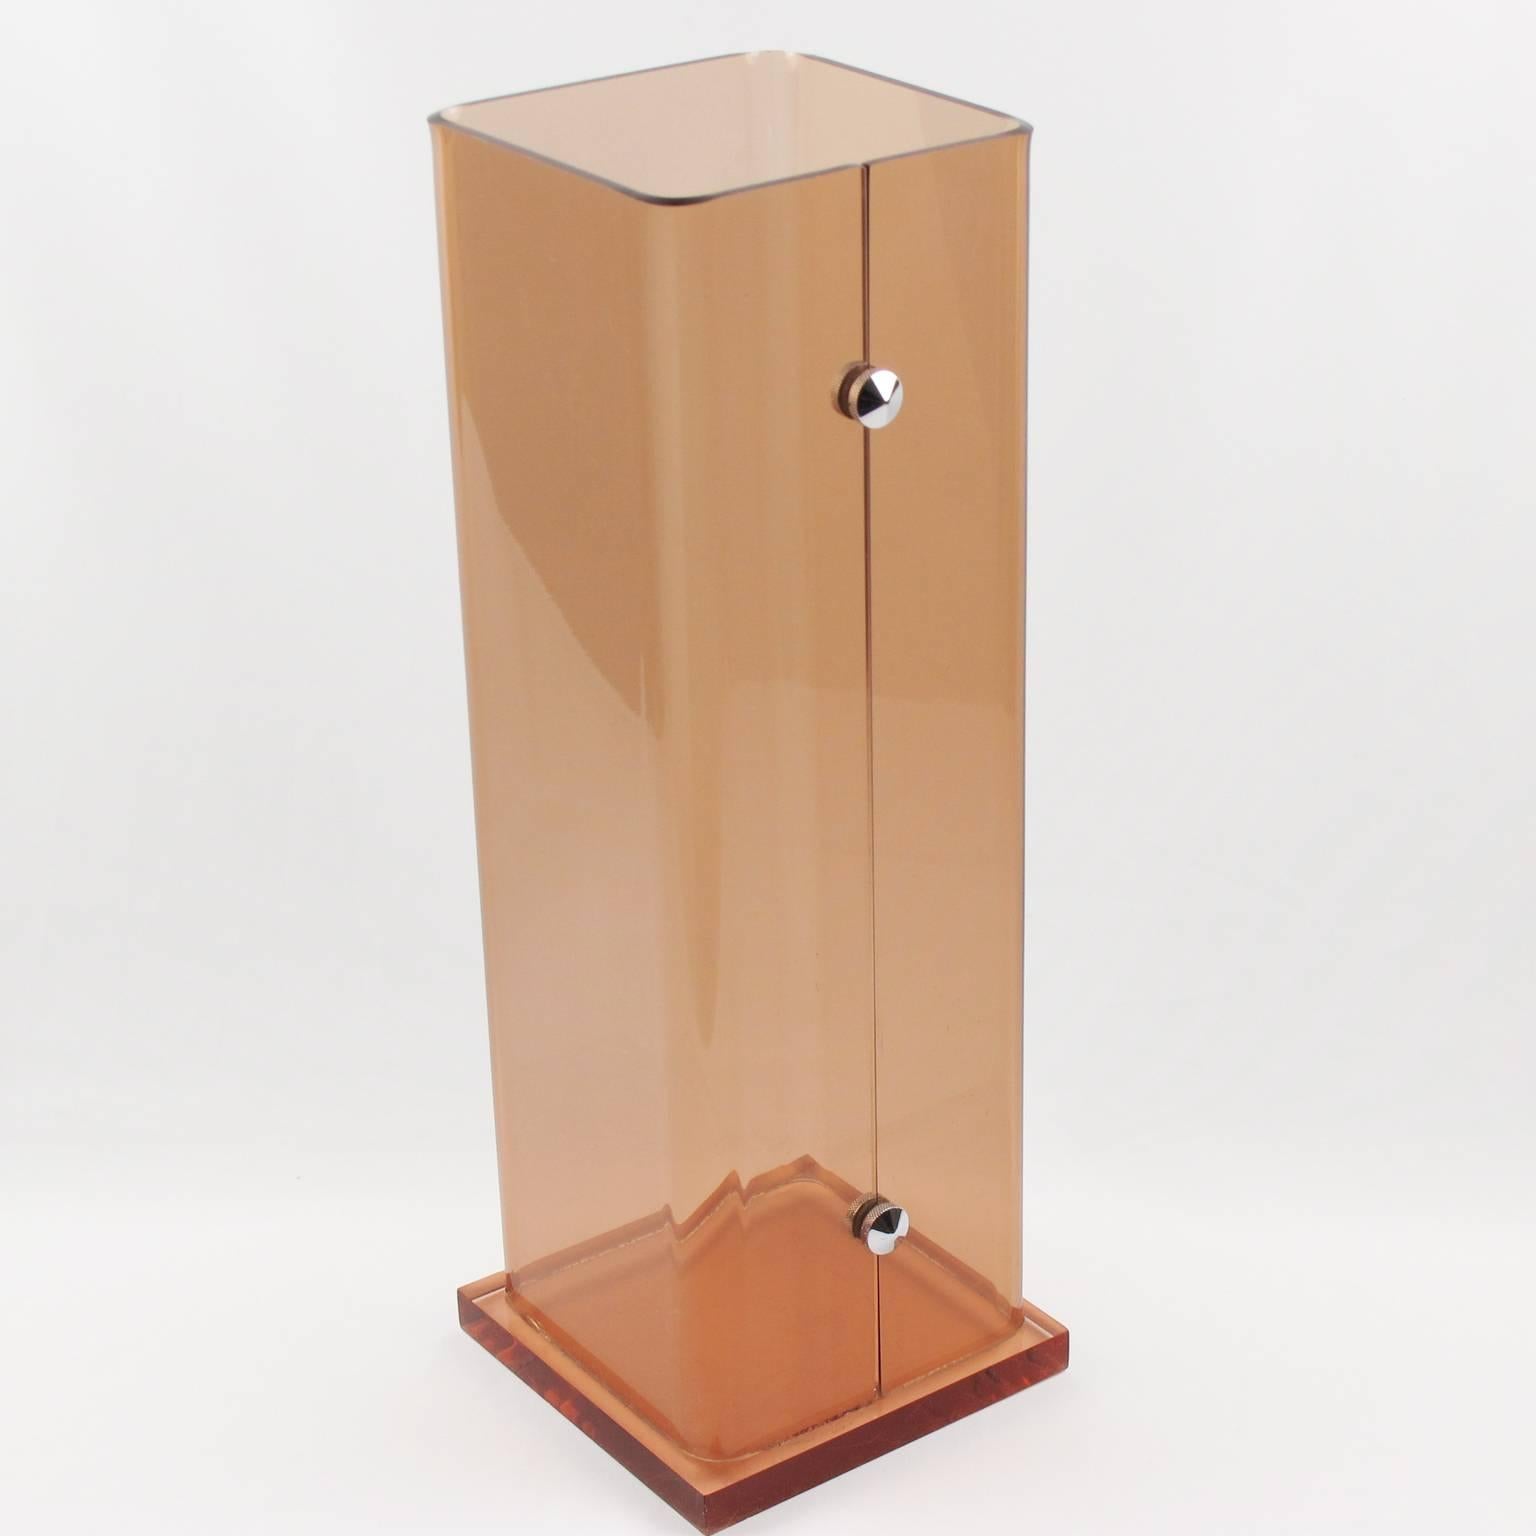 Elegant vintage Lucite umbrella stand designed for Roche Bobois, France in 1970s. Geometric tall shape with chrome accent and transparent smoked Lucite. Great accessory for any modern interior. Very good vintage condition.

Measurements: 7.07 in.